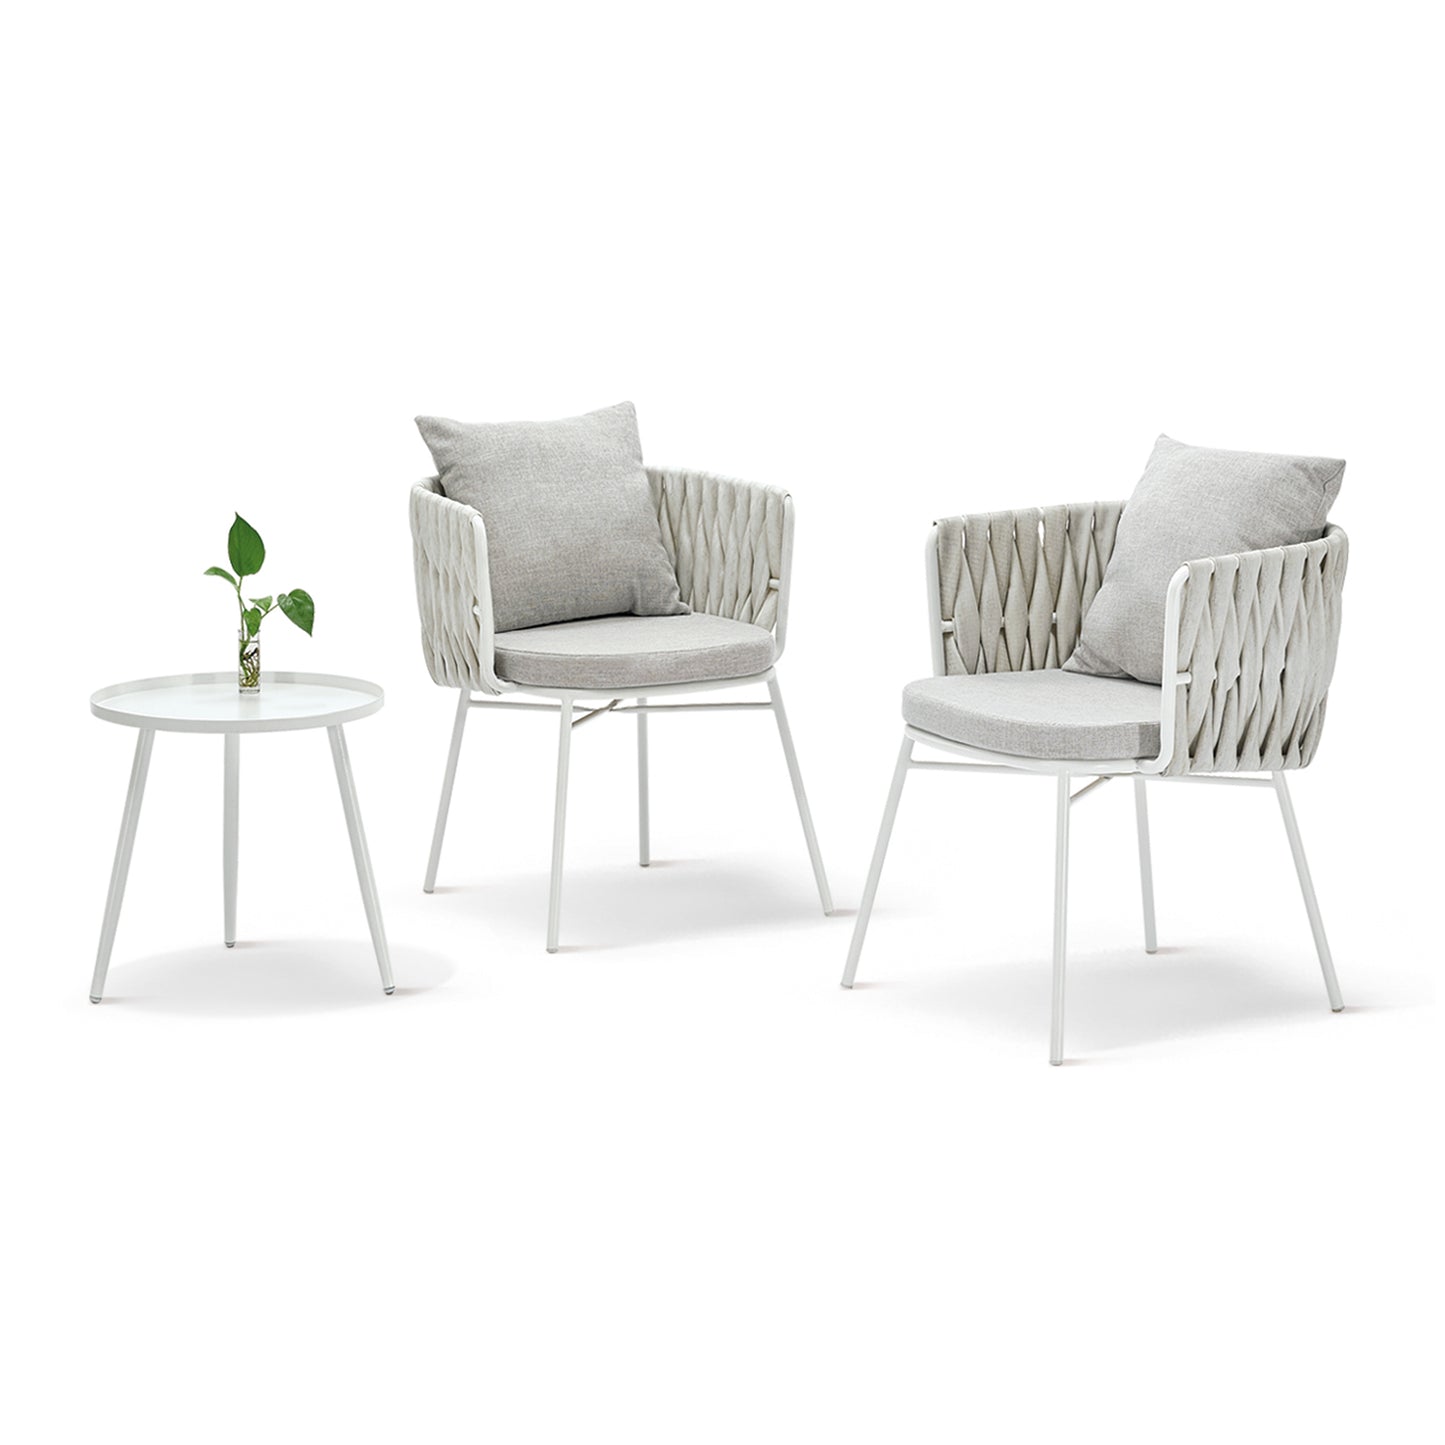 Indoor./Outdoor High Quality Rattan Garden Patio Coffee 3PCS Table and Chair Set, White Gray